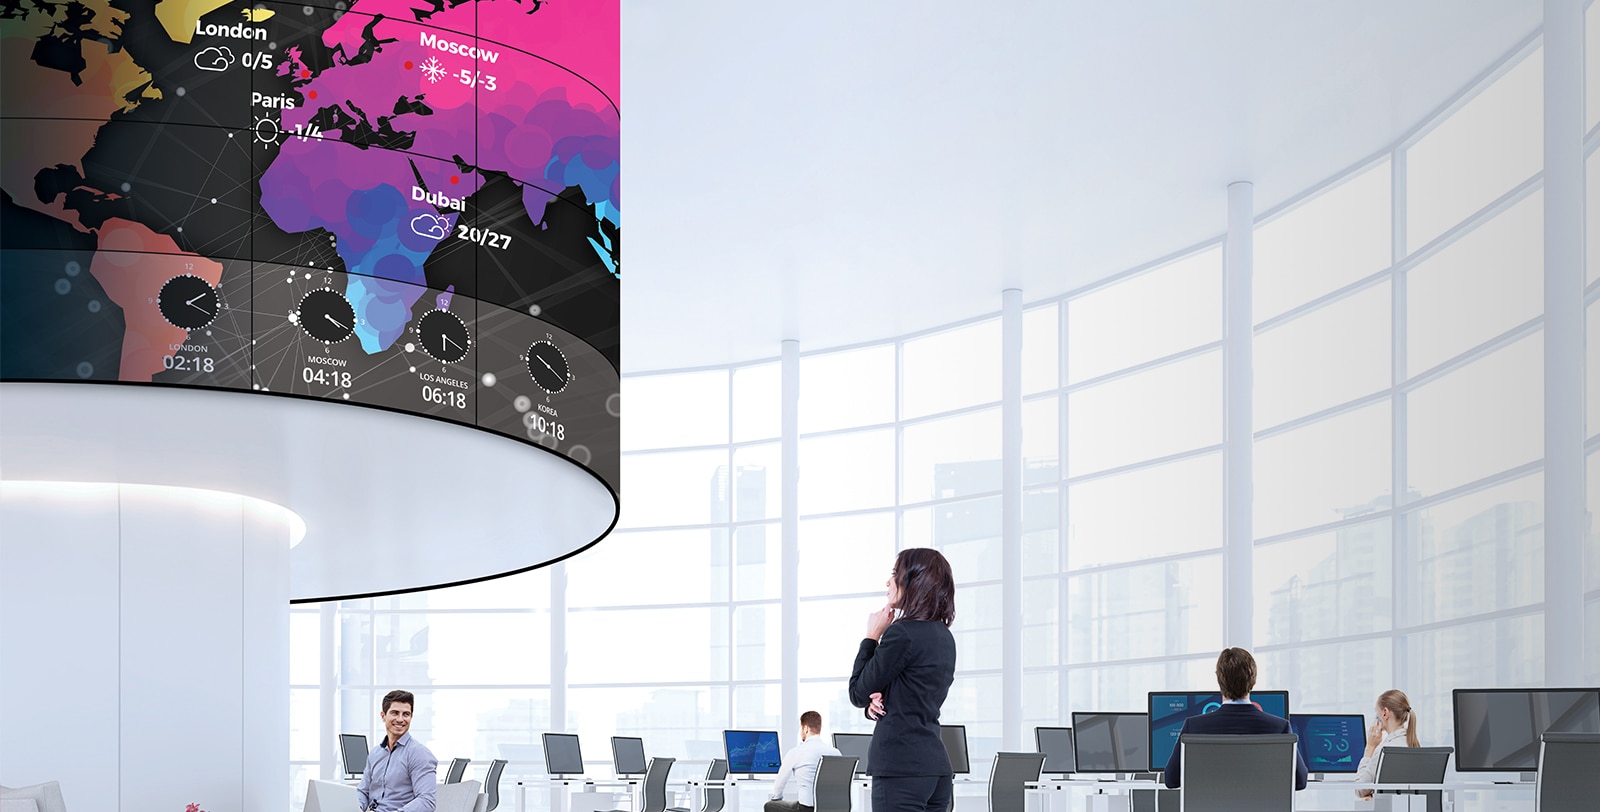 The woman is looking at the weather and time information displayed on the curved screen.